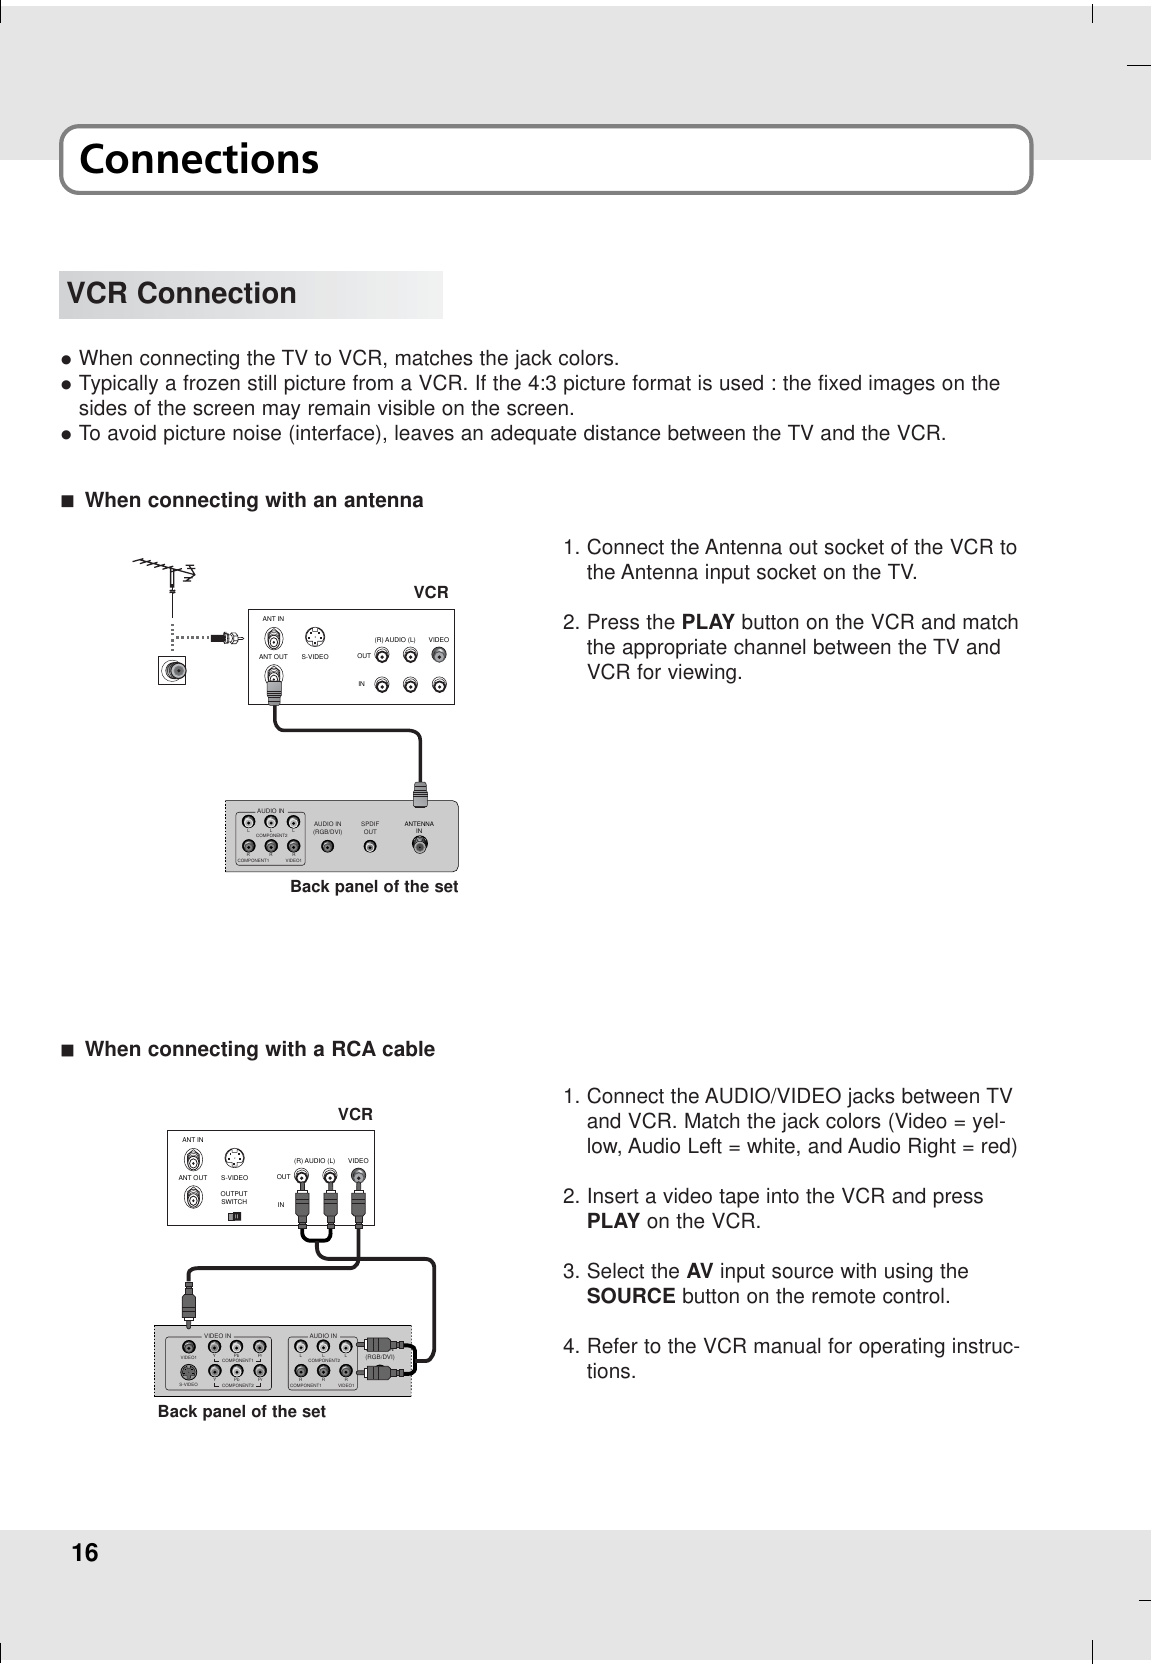 16ConnectionsVCR ConnectionAUDIO IN(RGB/DVI)SPDIFOUTANTENNAINL LR RCOMPONENT2VIDEO1RLAUDIO INCOMPONENT1ANT INANT OUT S-VIDEOINOUT(R) AUDIO (L) VIDEO1. Connect the Antenna out socket of the VCR tothe Antenna input socket on the TV.2. Press the PLAY button on the VCR and matchthe appropriate channel between the TV andVCR for viewing.OWhen connecting the TV to VCR, matches the jack colors.OTypically a frozen still picture from a VCR. If the 4:3 picture format is used : the fixed images on thesides of the screen may remain visible on the screen.OTo avoid picture noise (interface), leaves an adequate distance between the TV and the VCR.AWhen connecting with an antennaANT INANT OUT S-VIDEOINOUT(R) AUDIO (L) VIDEOOUTPUTSWITCHAUDIO IN(RGB/DVI)COMPONENT2YPbPrYPbPrVIDEO INVIDEO1S-VIDEOCOMPONENT1L LR RCOMPONENT2VIDEO1RLAUDIO INCOMPONENT11. Connect the AUDIO/VIDEO jacks between TVand VCR. Match the jack colors (Video = yel-low, Audio Left = white, and Audio Right = red)2. Insert a video tape into the VCR and pressPLAY on the VCR. 3. Select the AV input source with using theSOURCE button on the remote control.4. Refer to the VCR manual for operating instruc-tions.AWhen connecting with a RCA cableVCRVCRBack panel of the setBack panel of the set